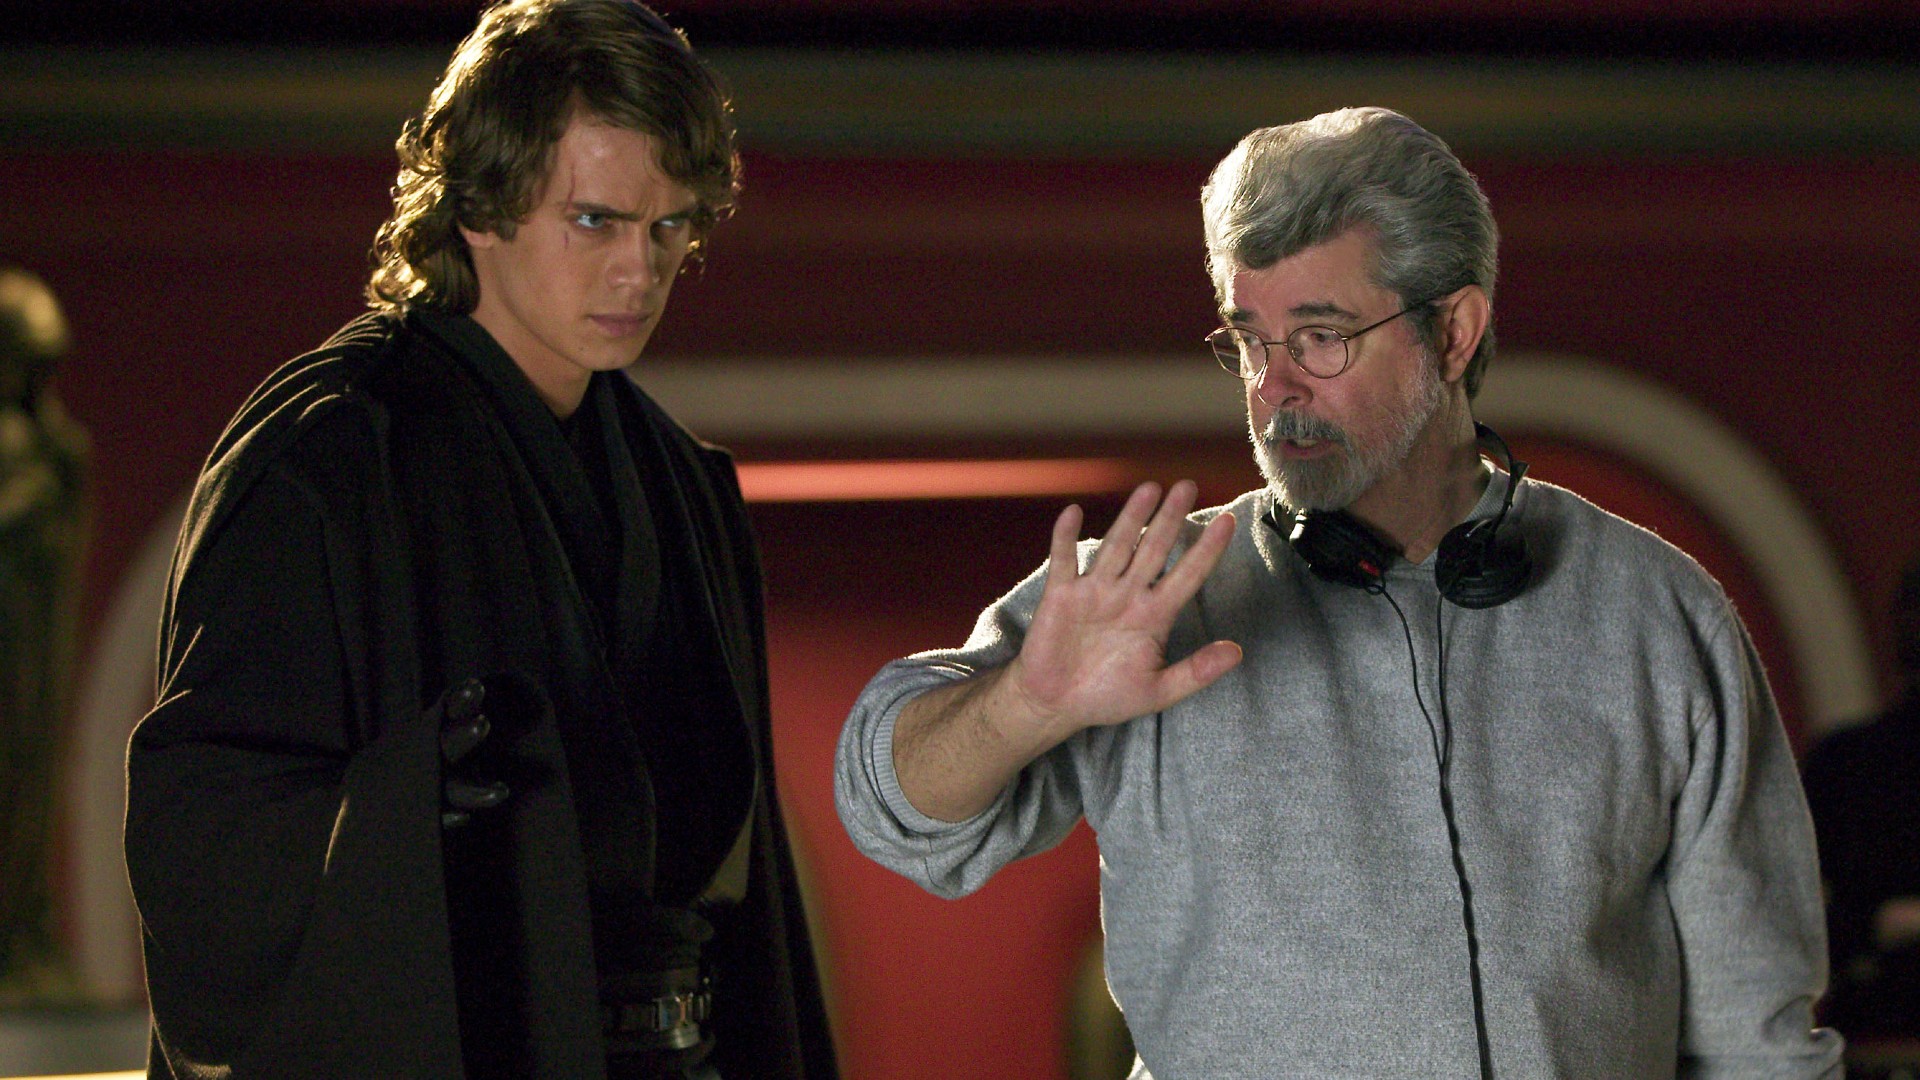 George Lucas is Worth $5 Billion, but His Kids Won't Get Any of It - Here's Why